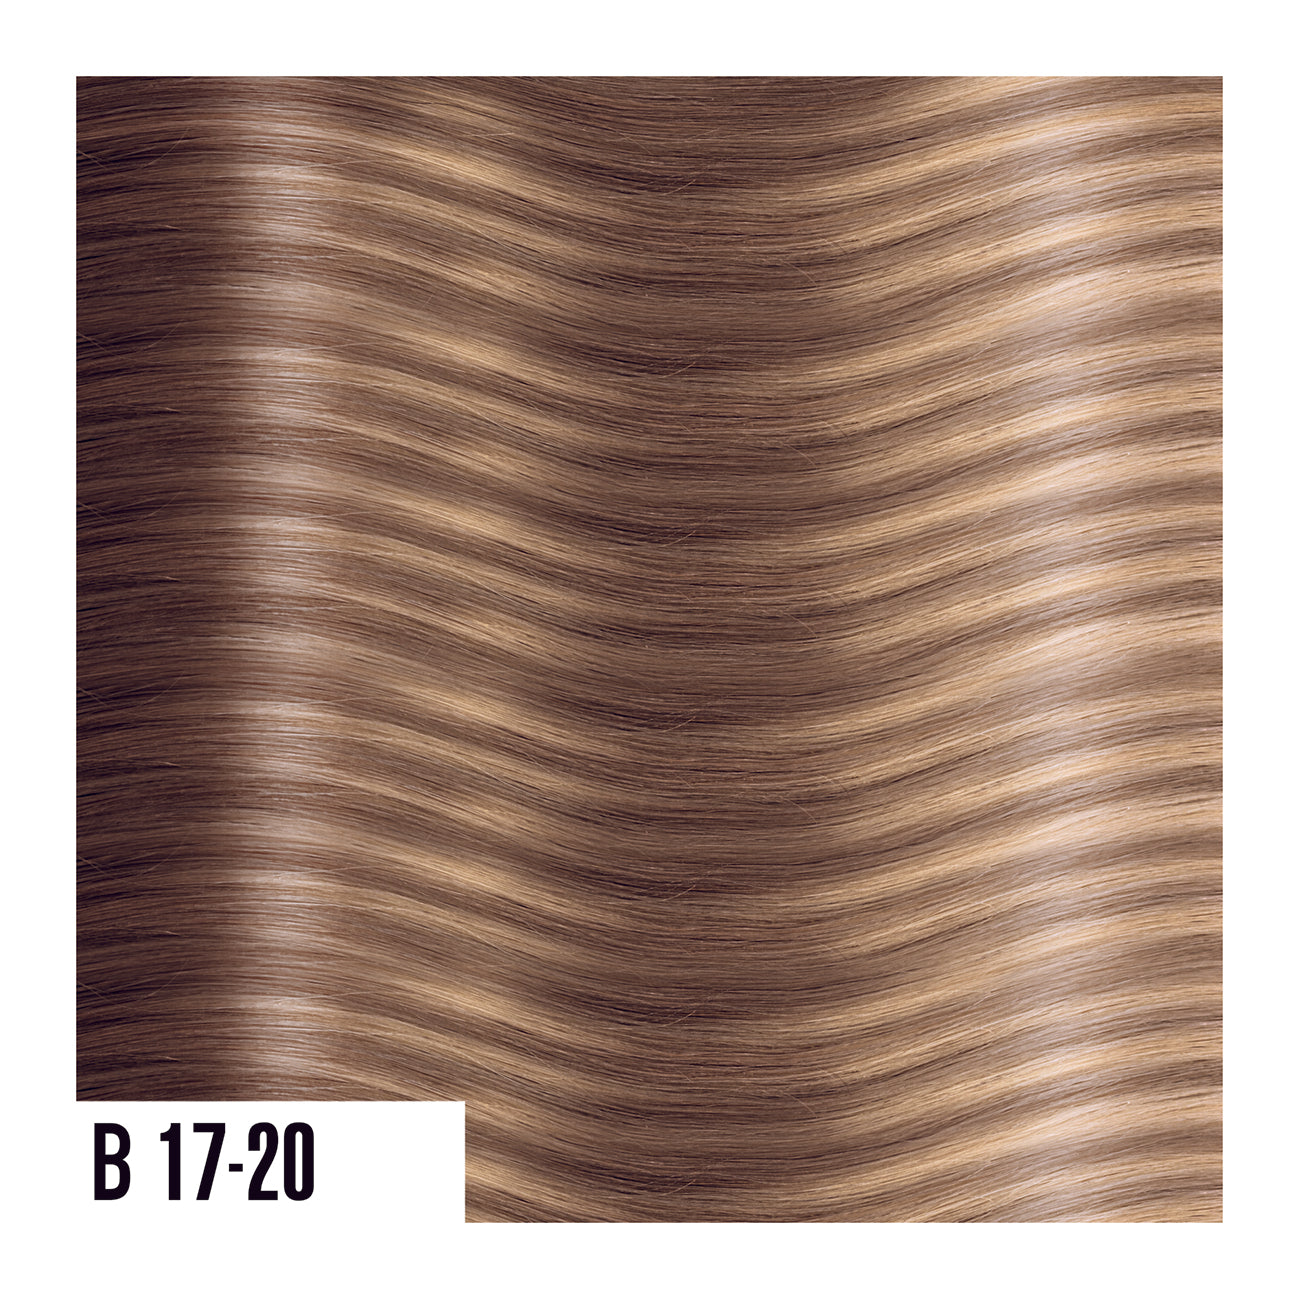 Keratin Extensions Blend of light brown and gold - Balayage colors are a perfect combination of natural colored roots that blends into highlighted ends.